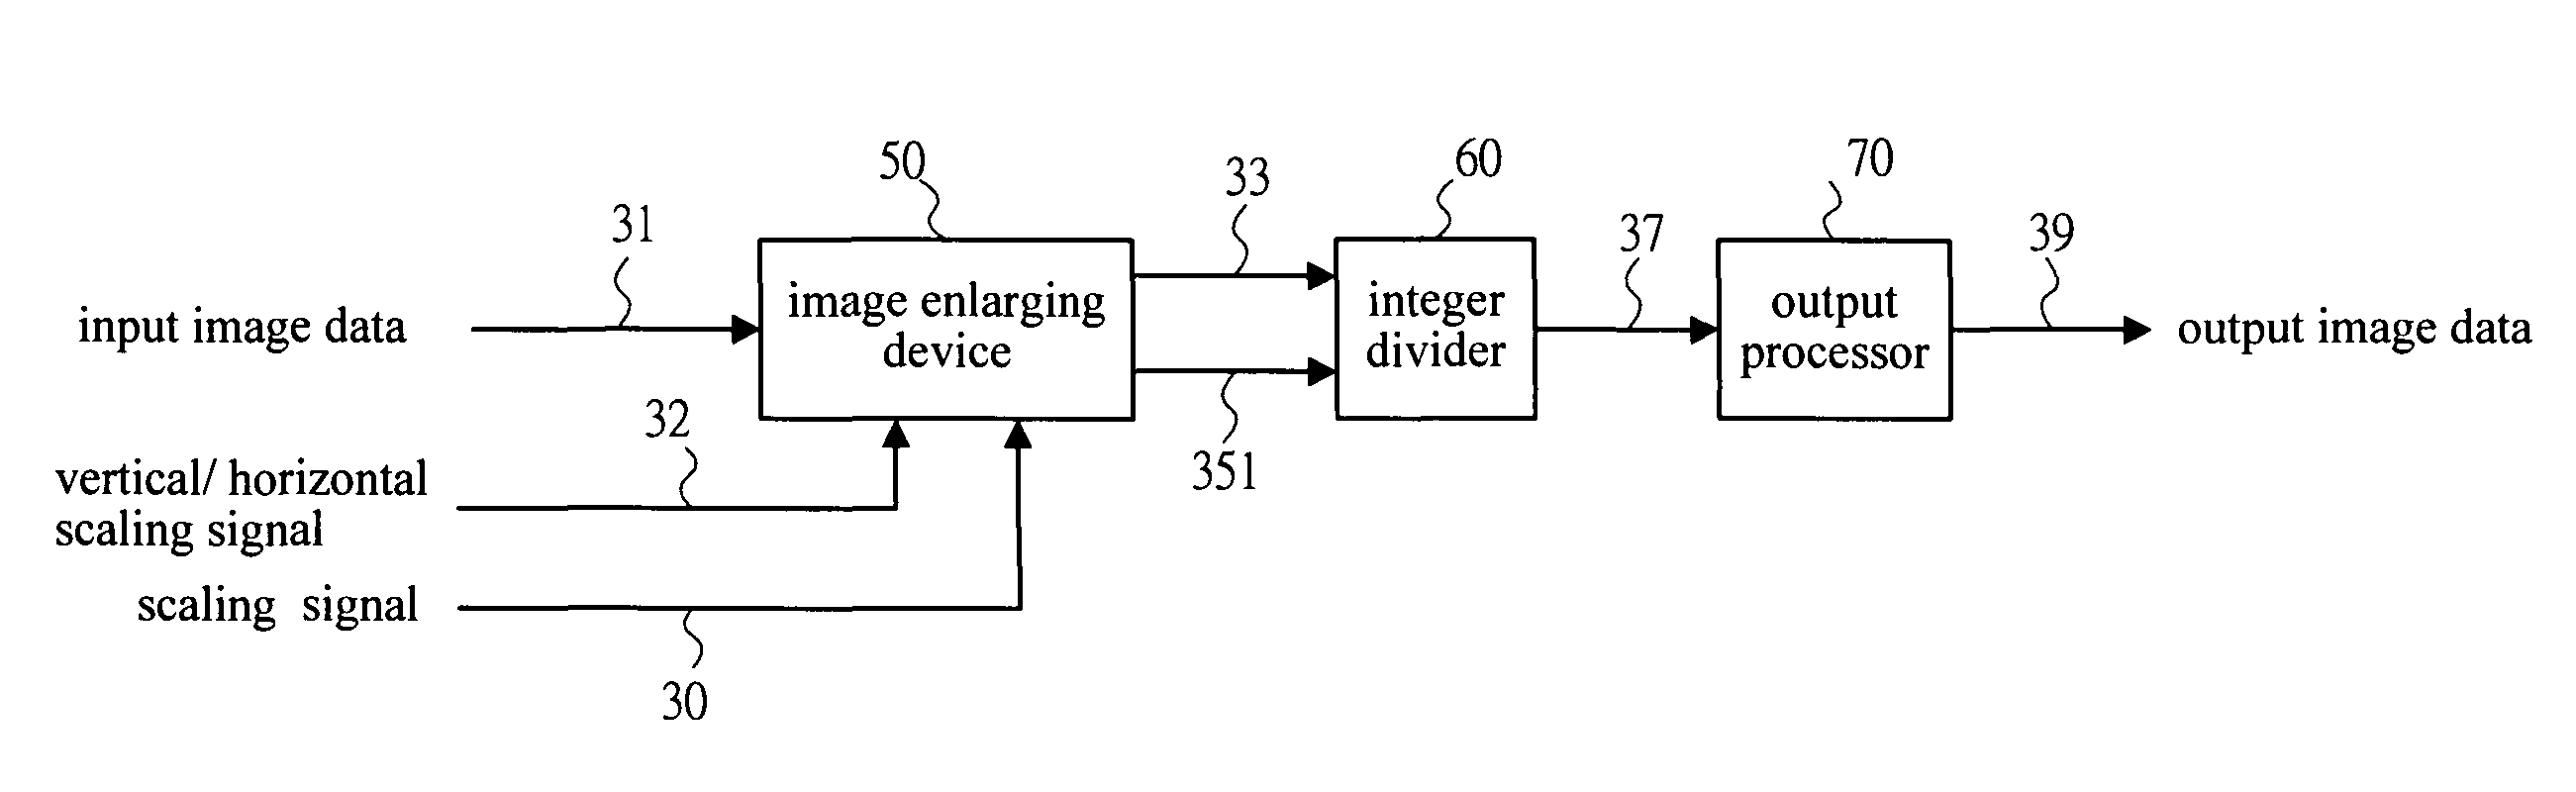 Scaling device of image process